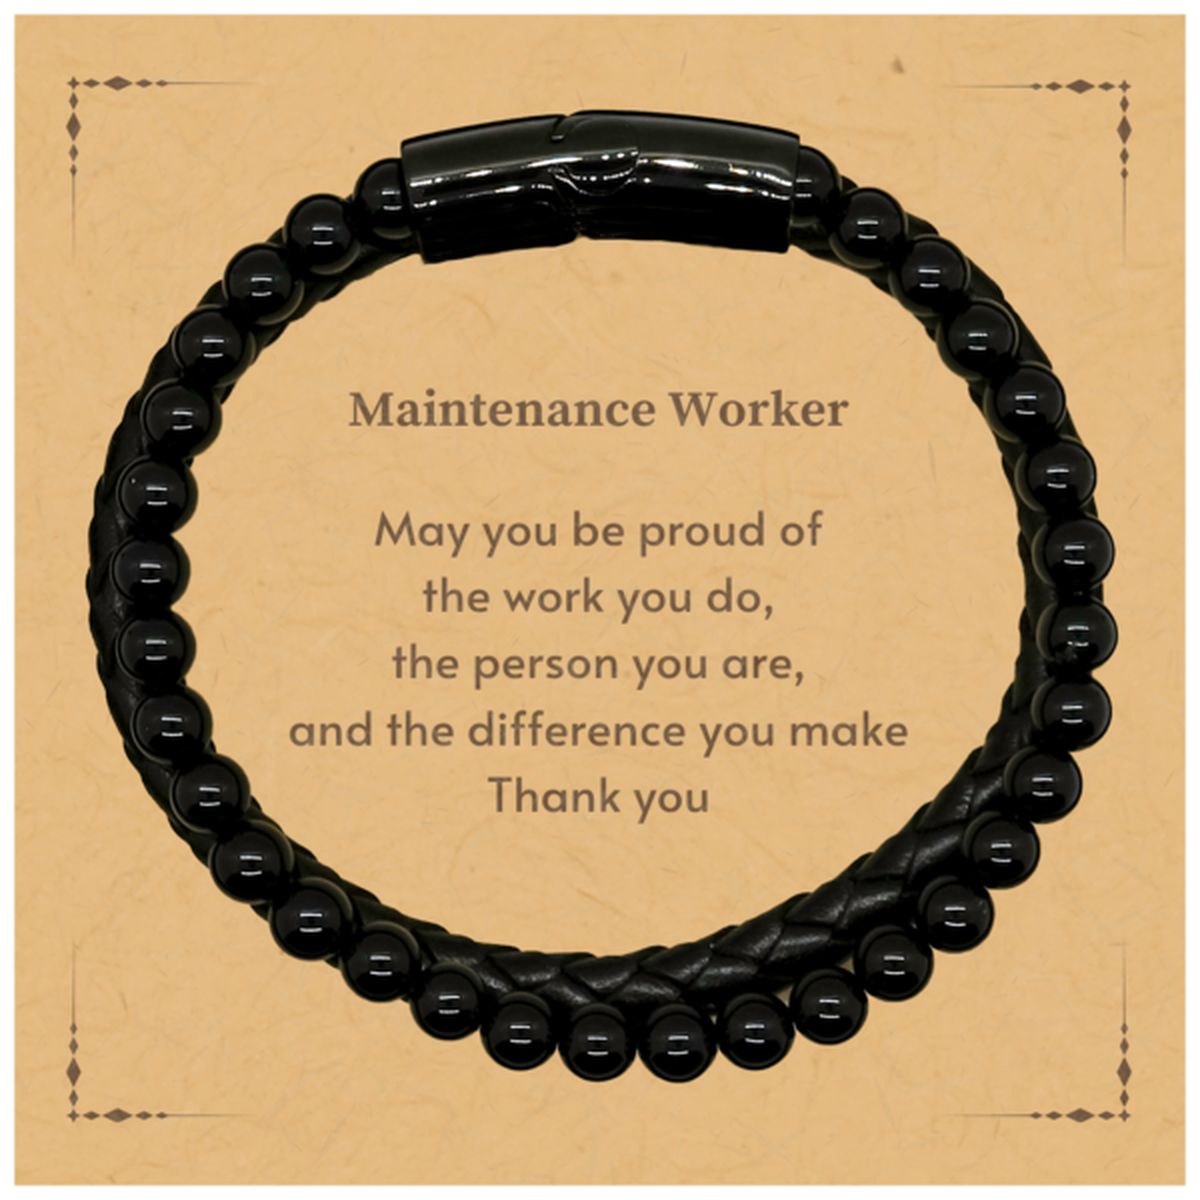 Heartwarming Stone Leather Bracelets Retirement Coworkers Gifts for Maintenance Worker, Maintenance Worker May You be proud of the work you do, the person you are Gifts for Boss Men Women Friends